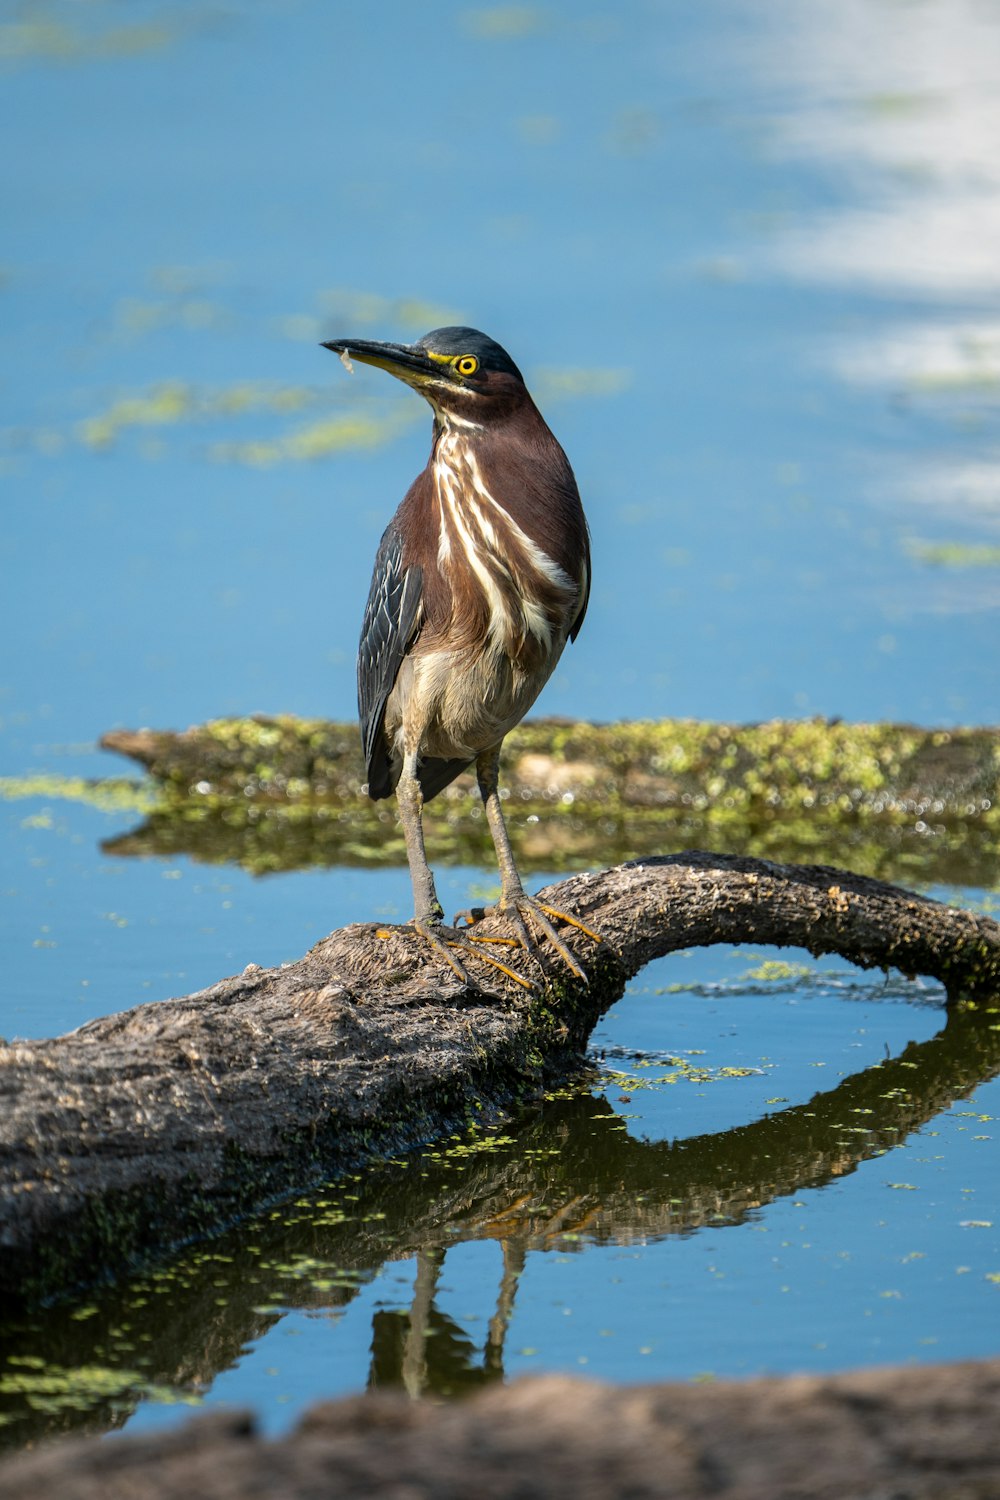 a bird is standing on a log in the water